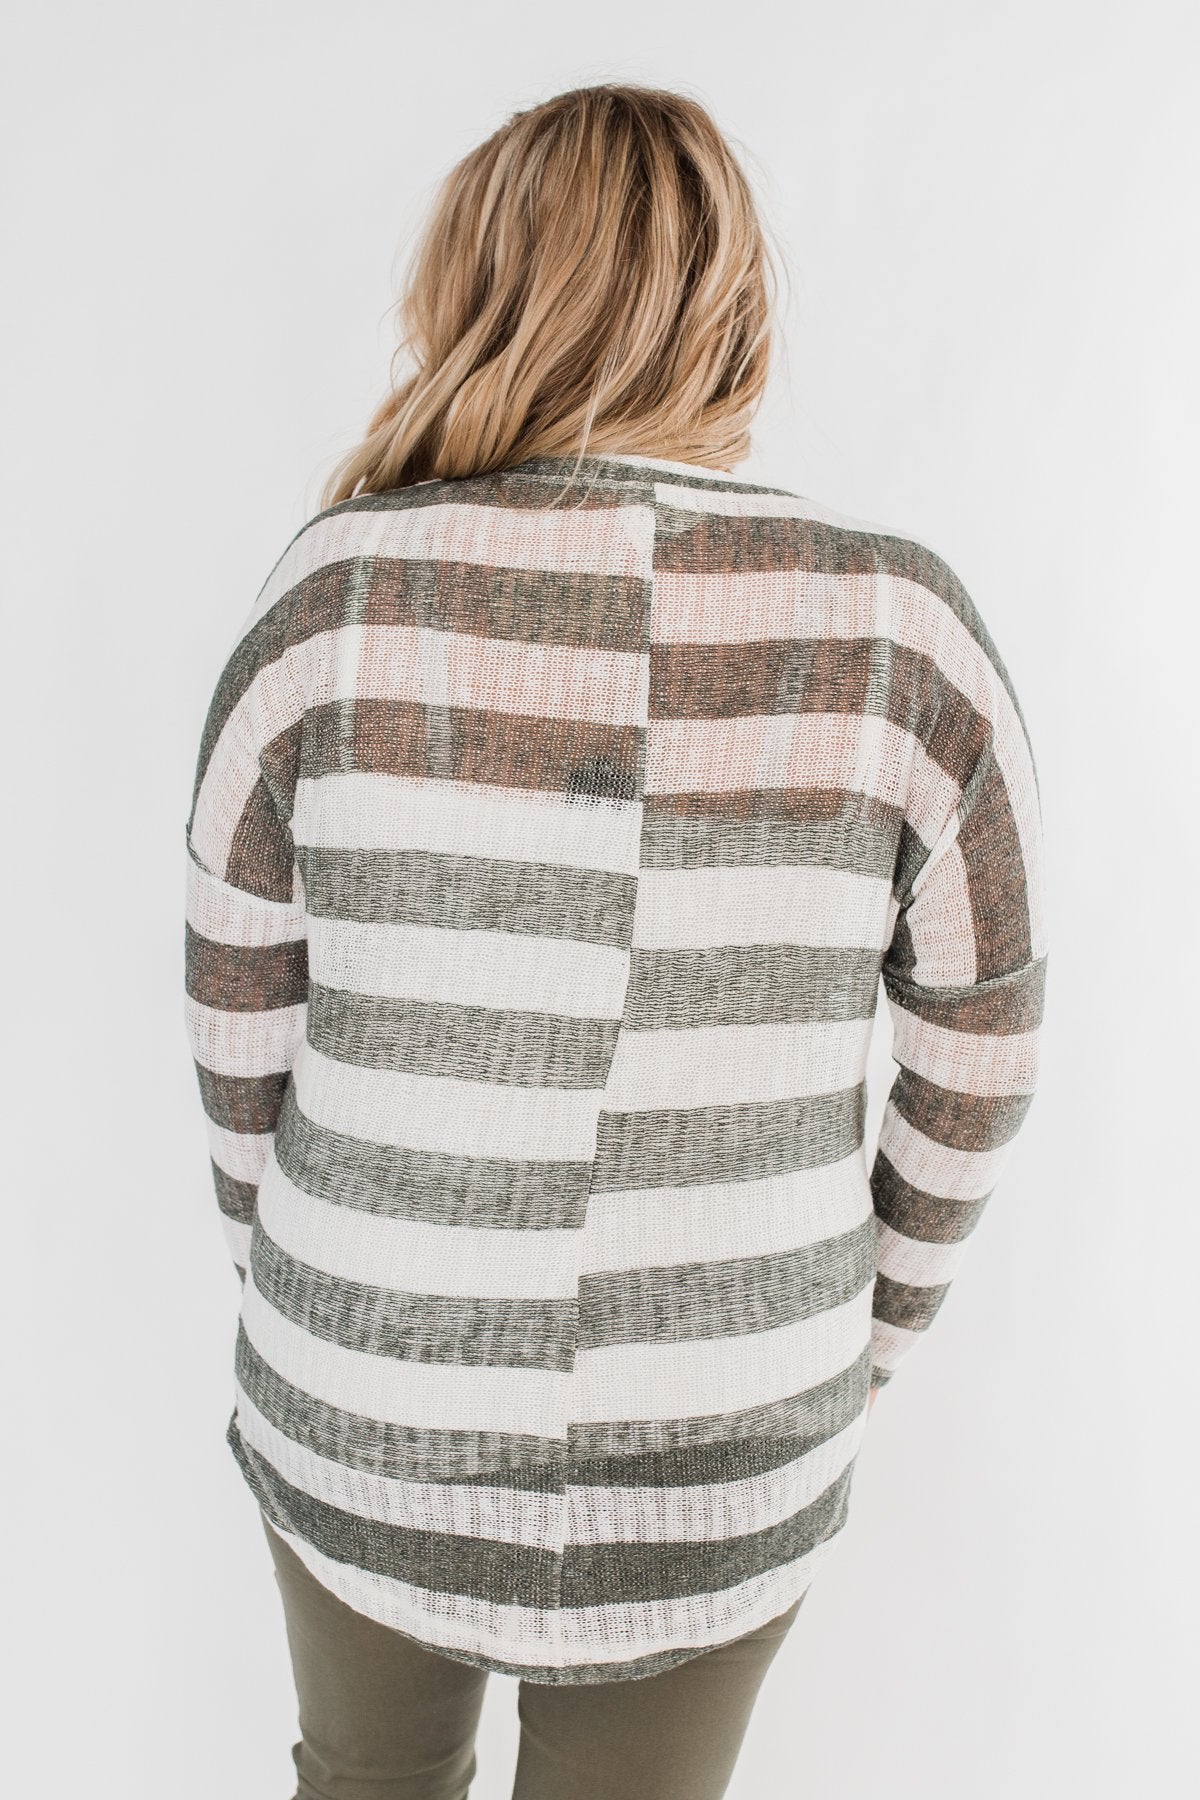 The Right Direction Striped Knitted Top- Olive